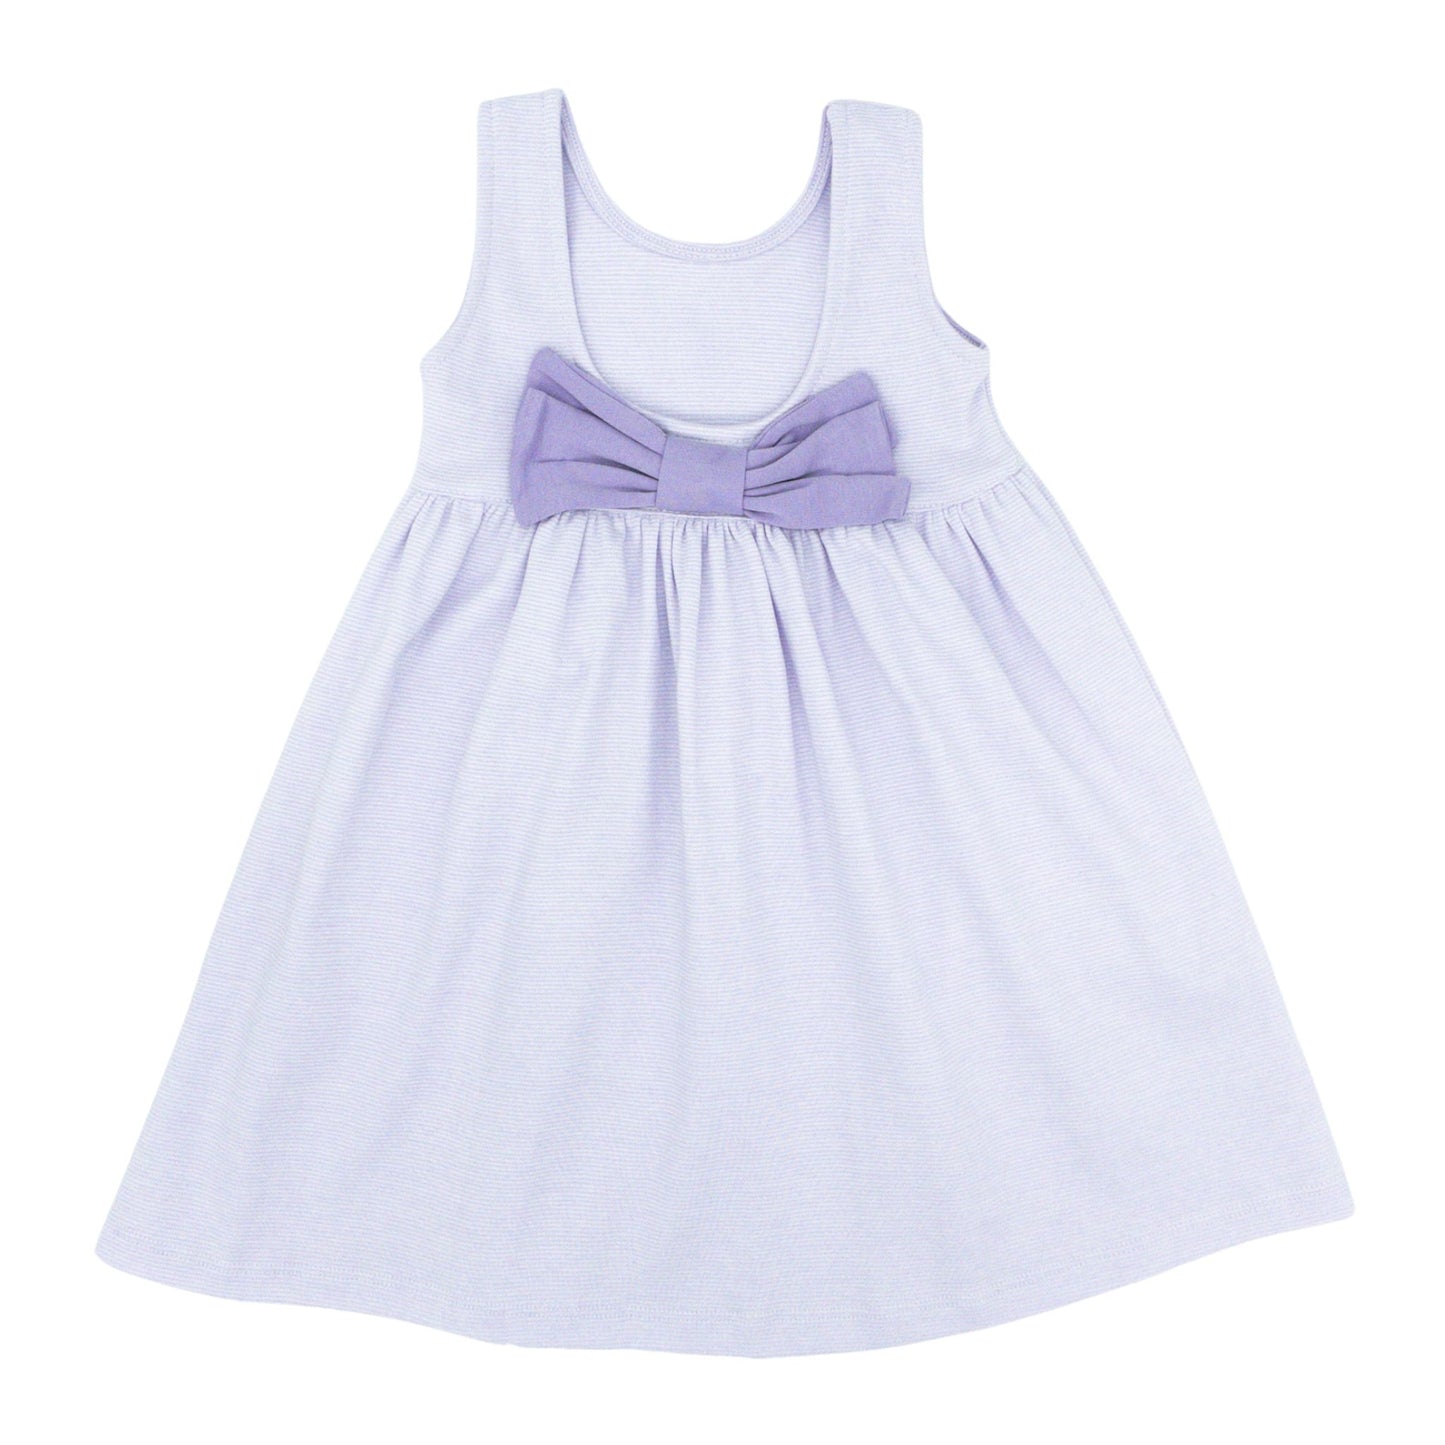 Pima Sleeveless Dress with Bow in Back